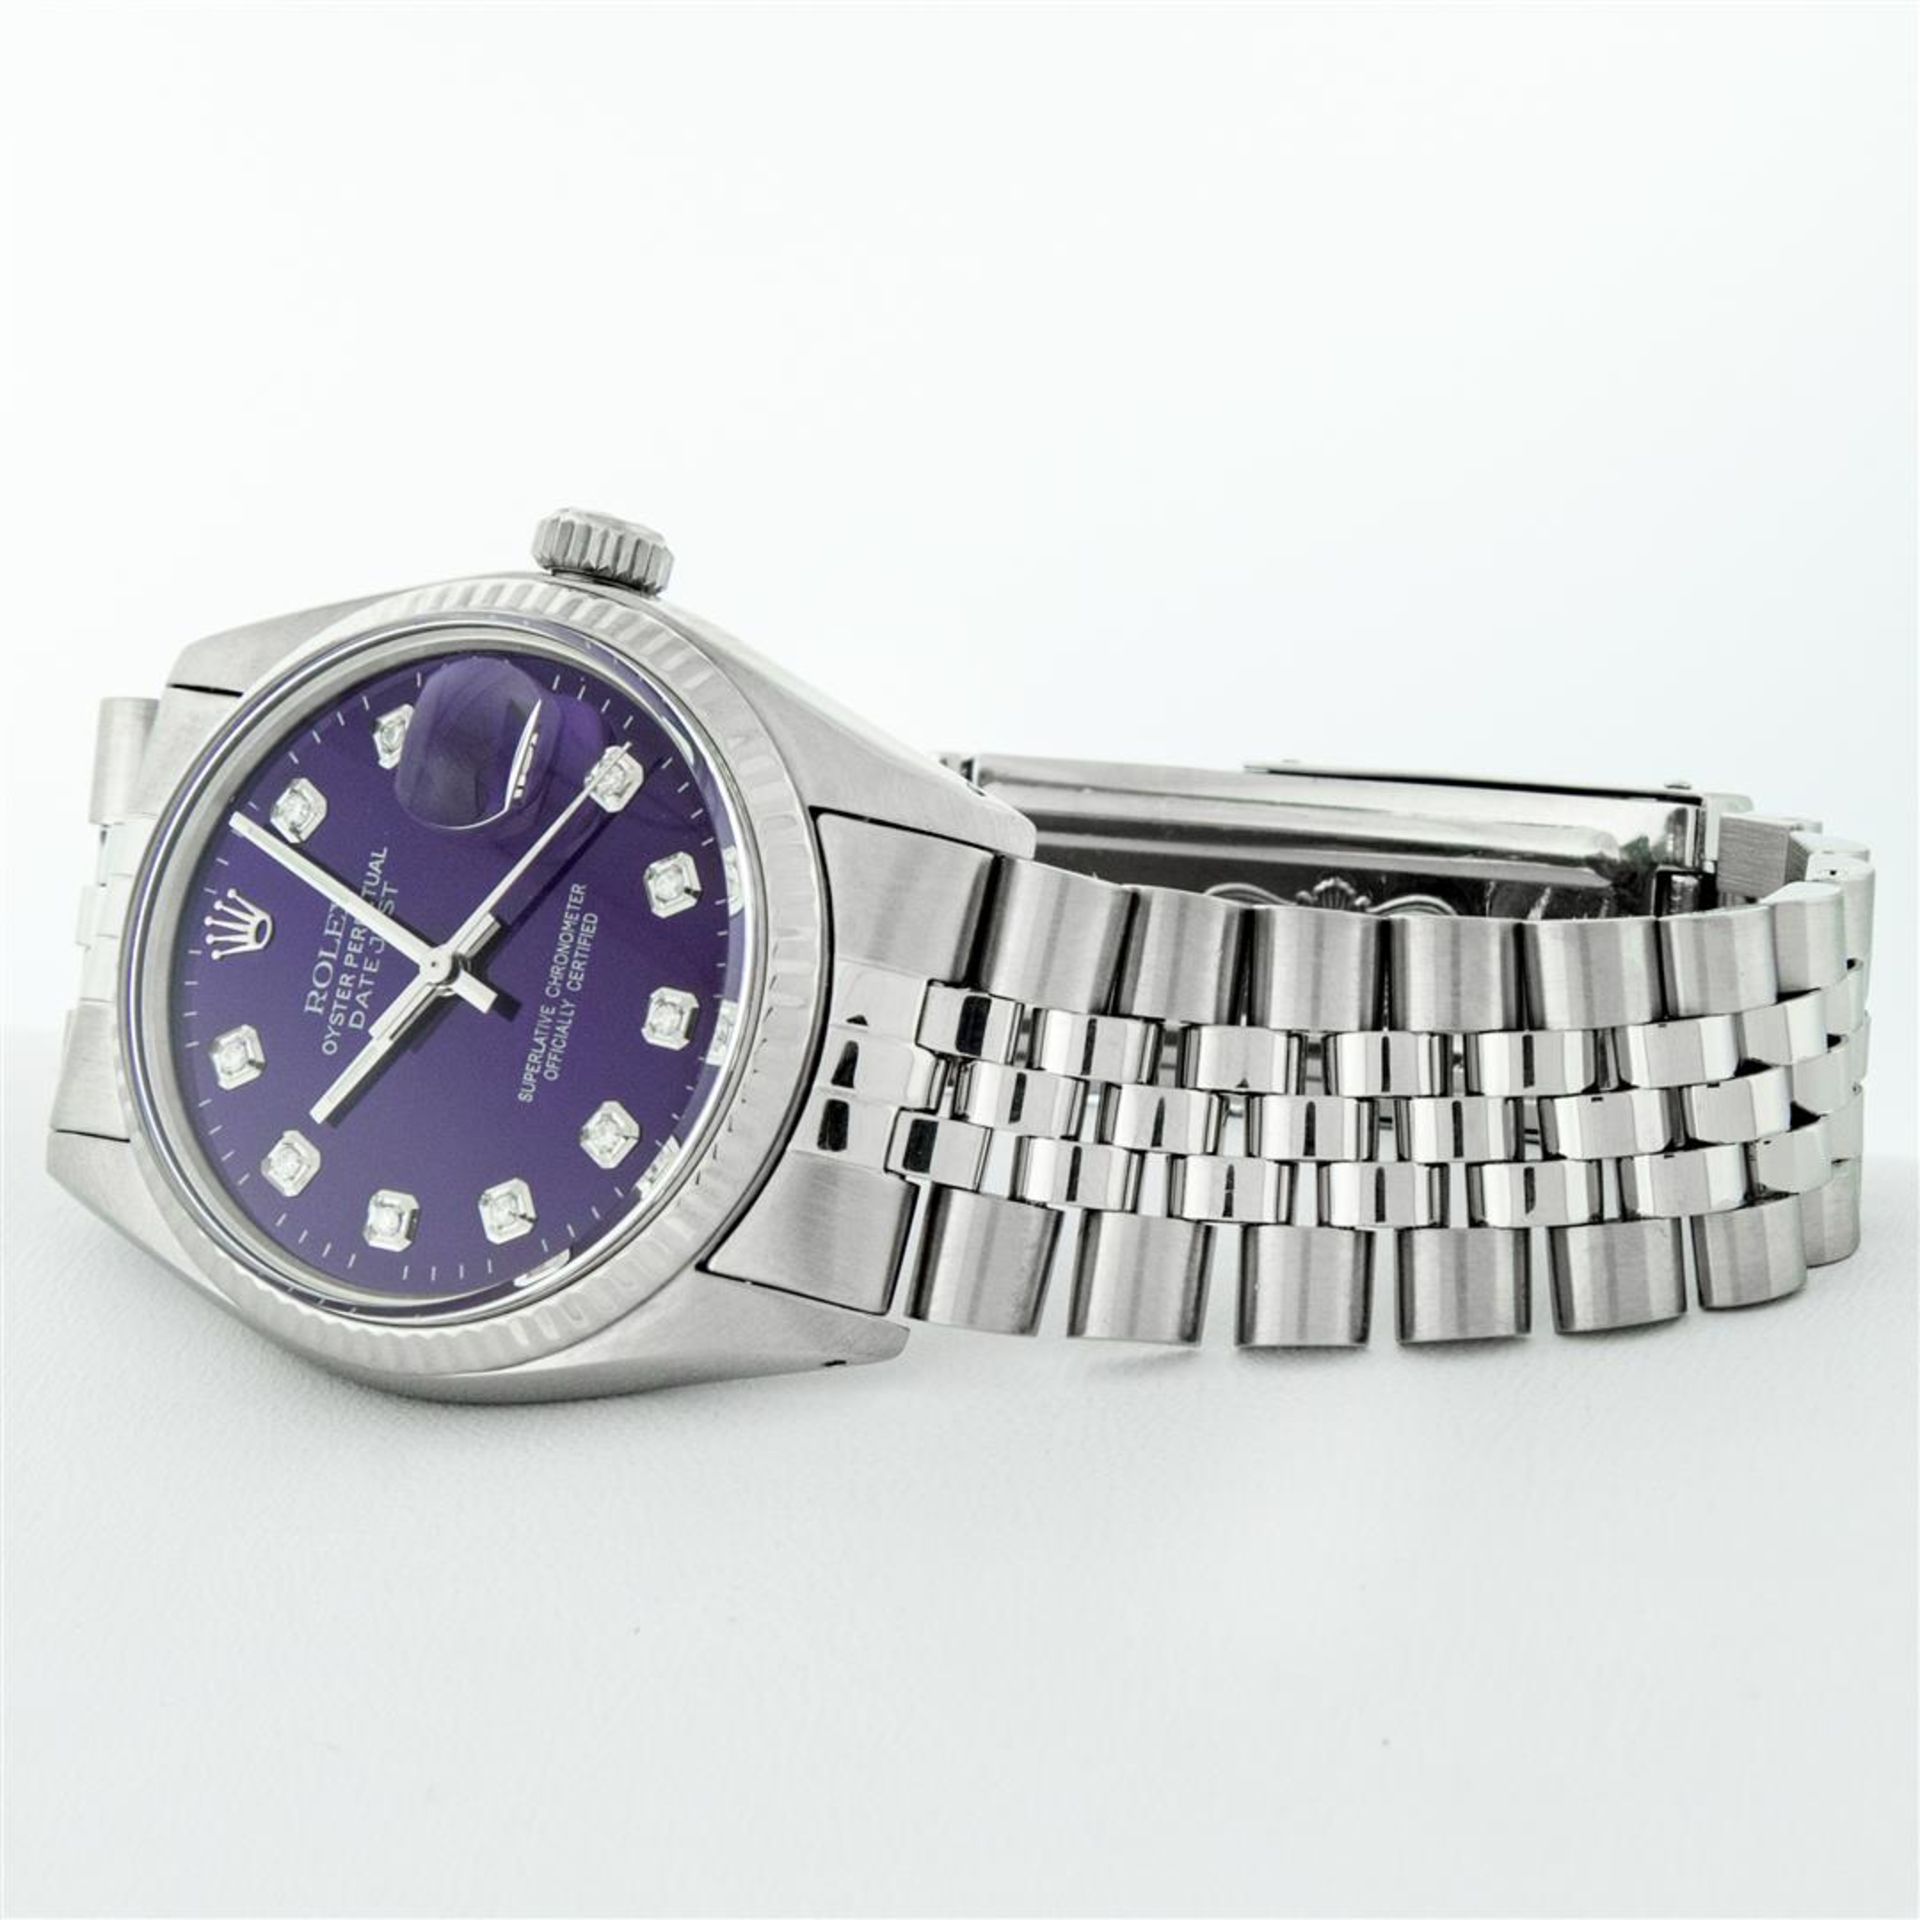 Rolex Mens Stainless Steel Purple Diamond 36MM Datejust Oyster Perpetual Wristwa - Image 4 of 9